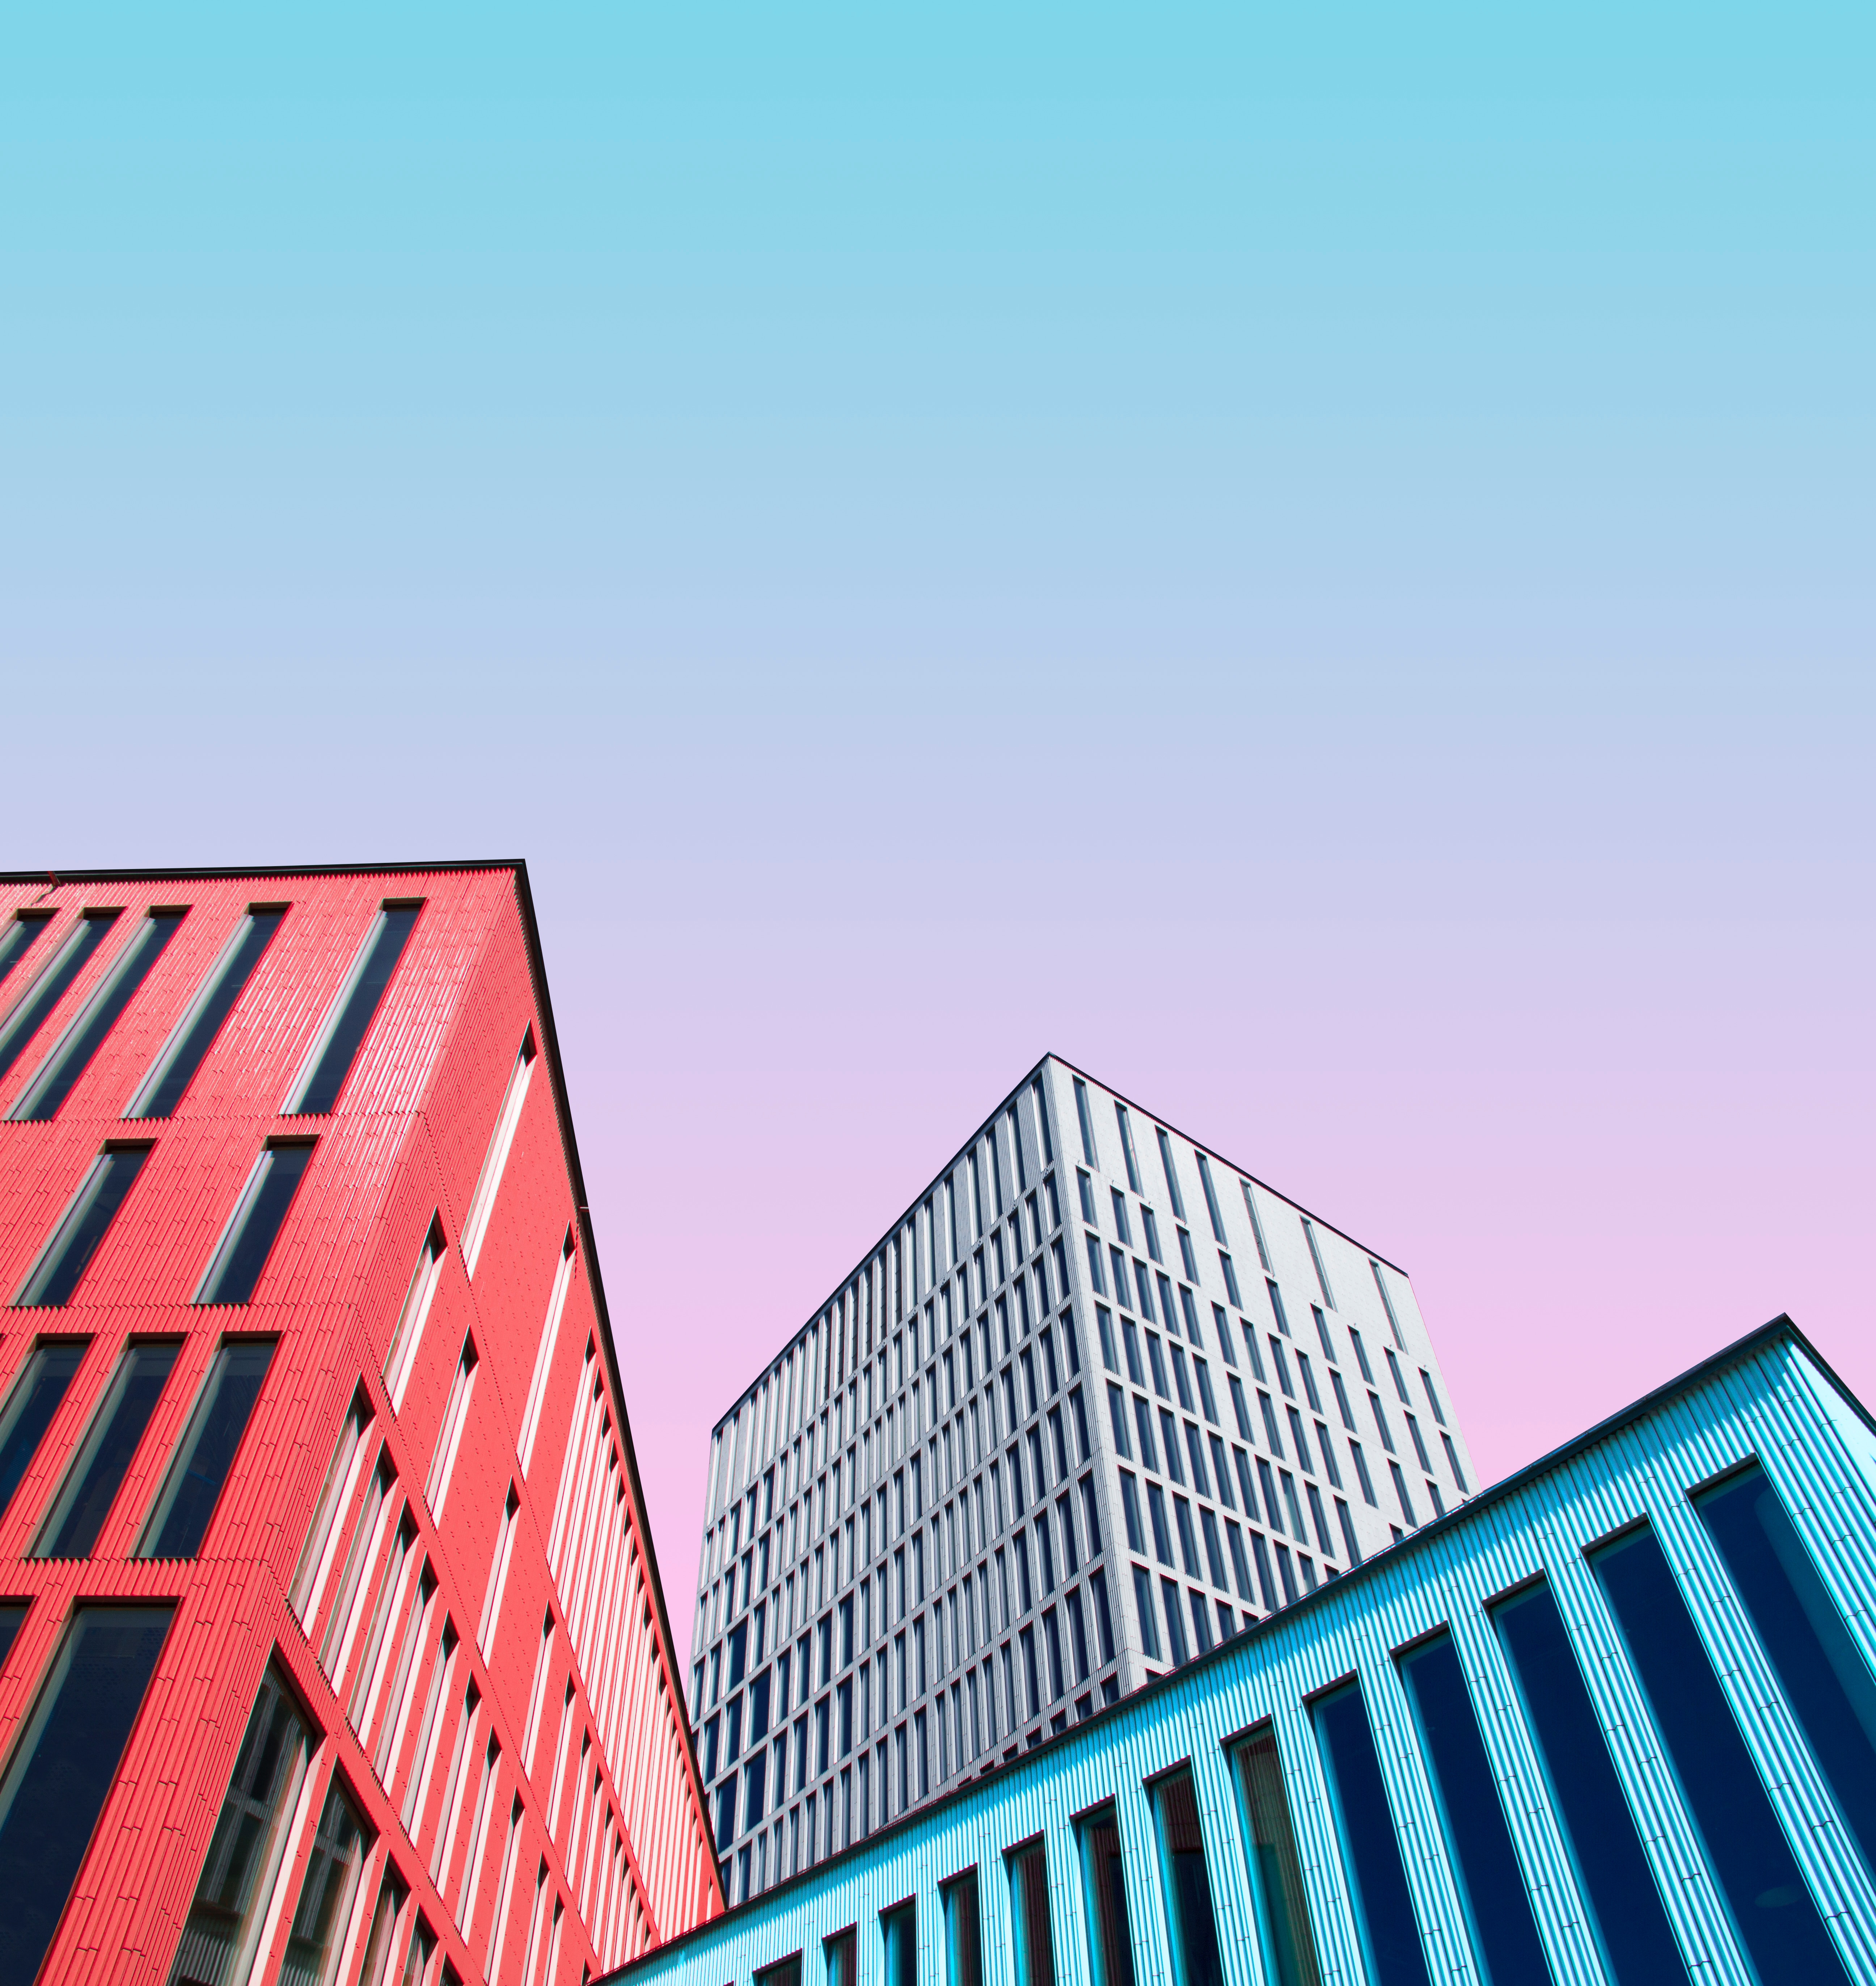 multicolored, architecture, building, motley, minimalism, symmetry Aesthetic wallpaper